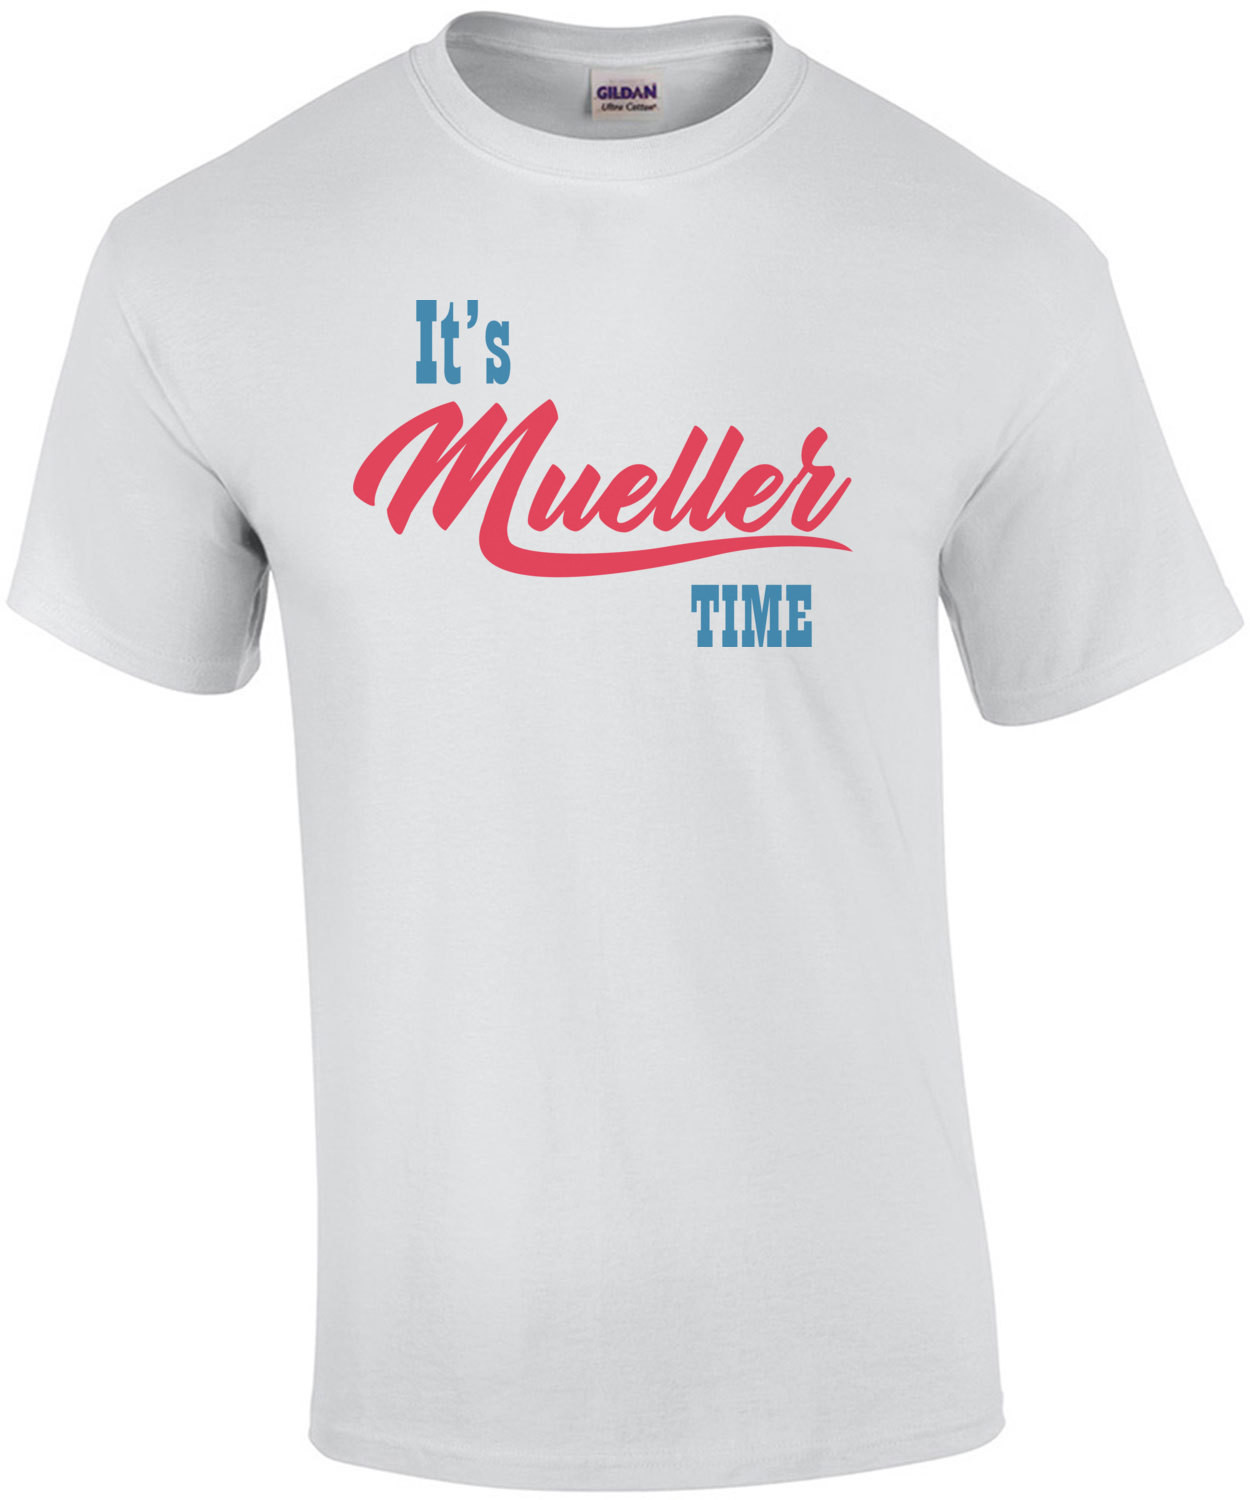 I'ts Mueller Time - Trump Administration T-Shirt